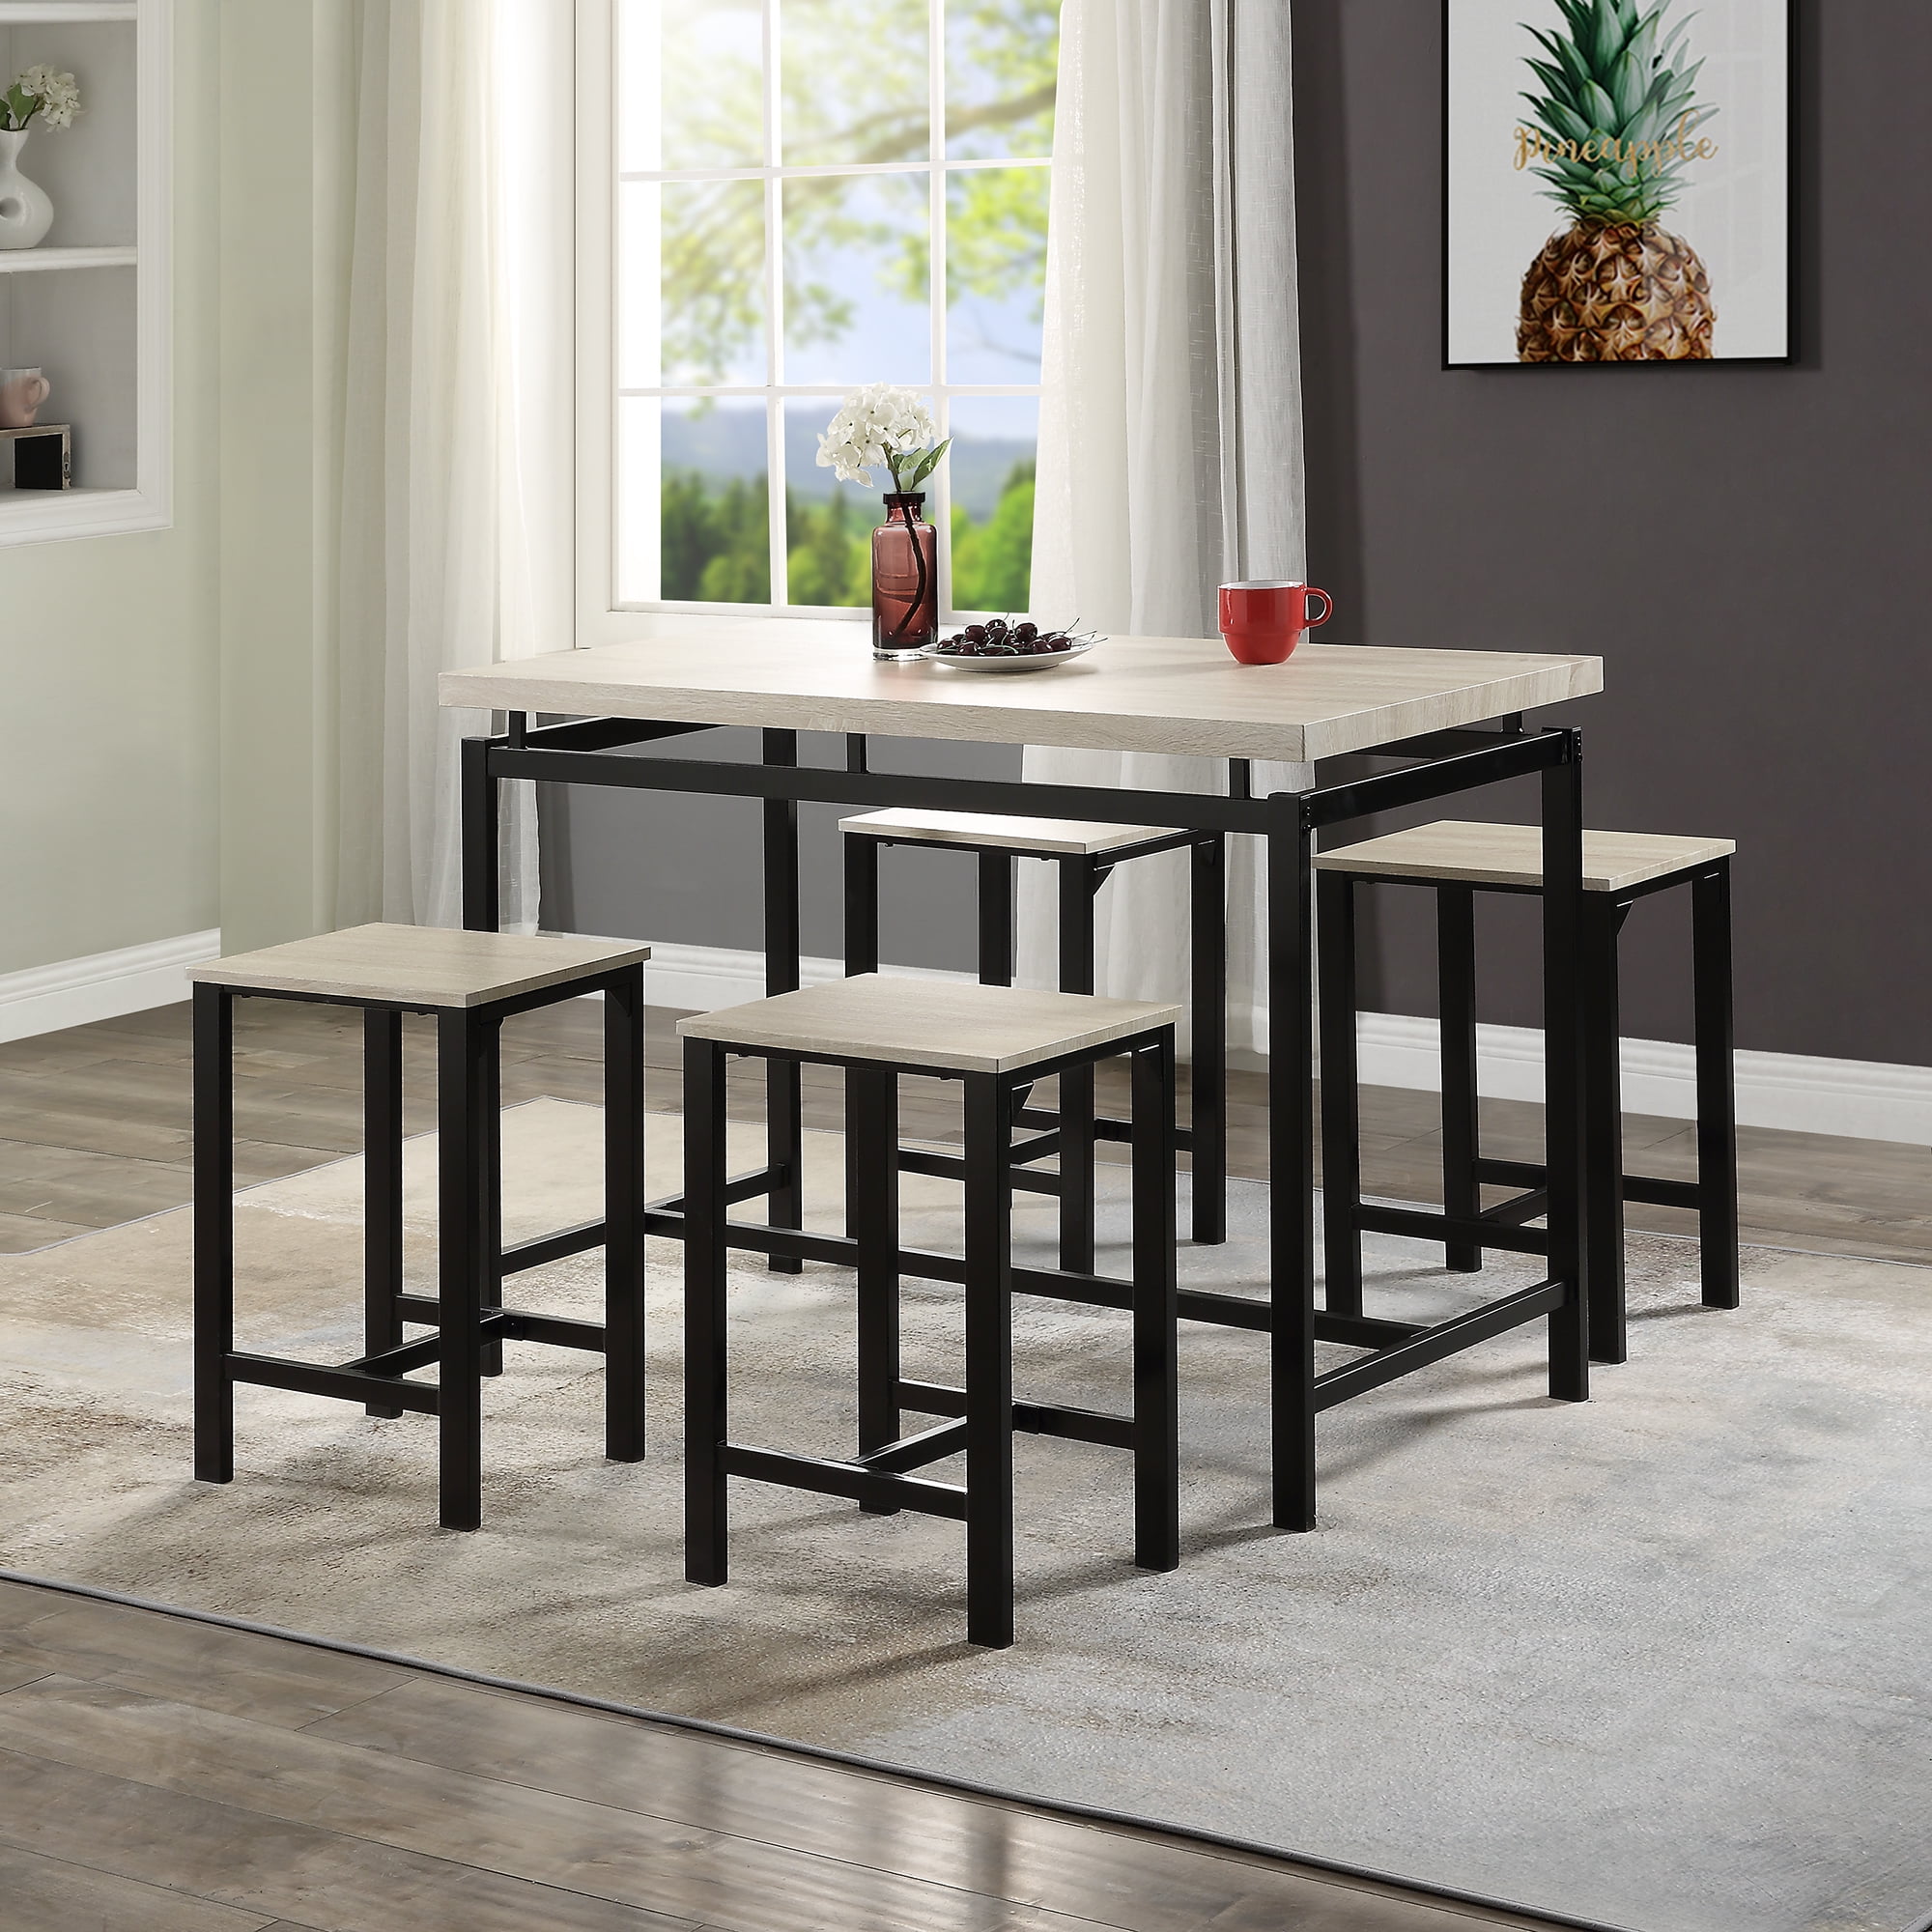 Counter Height Dining Set, Modern 5-Piece Dining Room Set ...